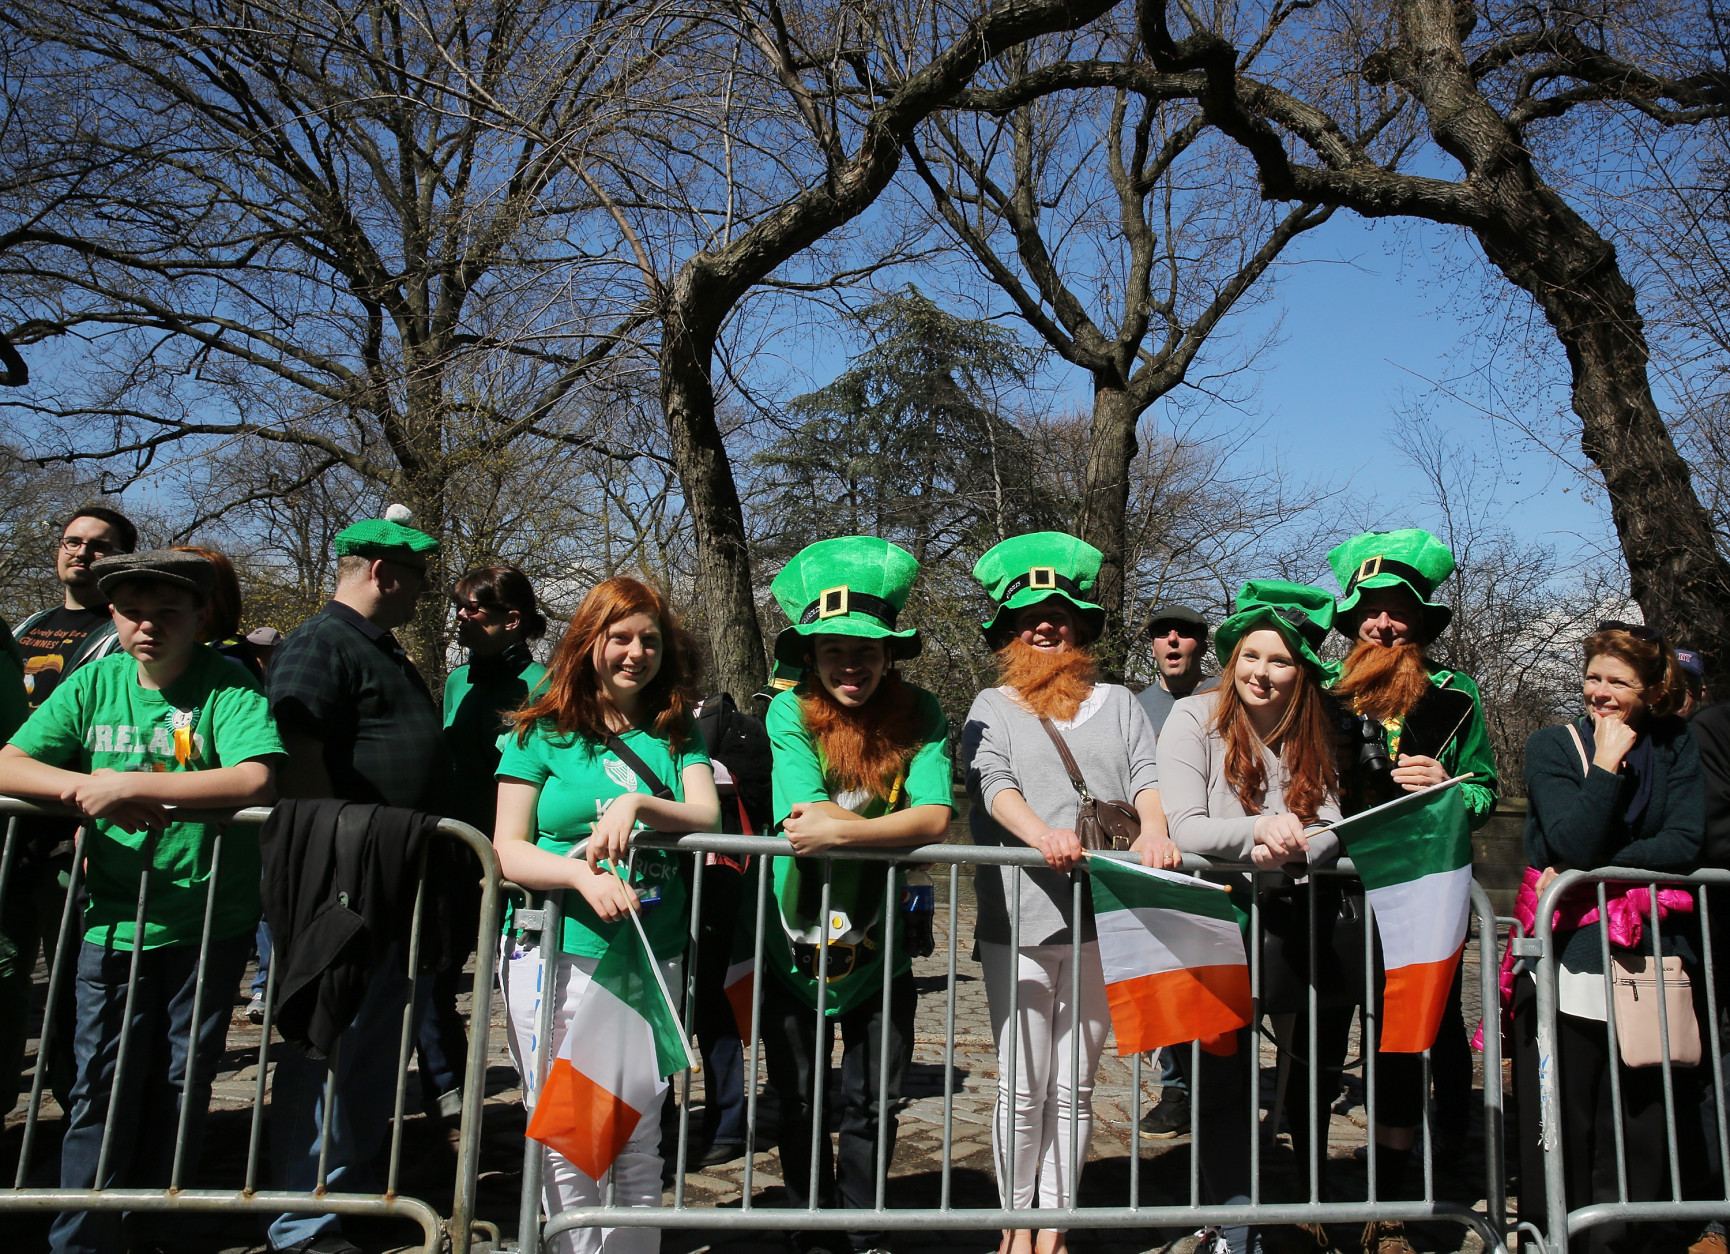 NEW YORK, NY - MARCH 17:  Spectators at the 255th annual St. Patricks Day Parade along Fifth Avenue in New York City on March 17, 2016 in New York City.  (Photo by Jemal Countess/Getty Images)